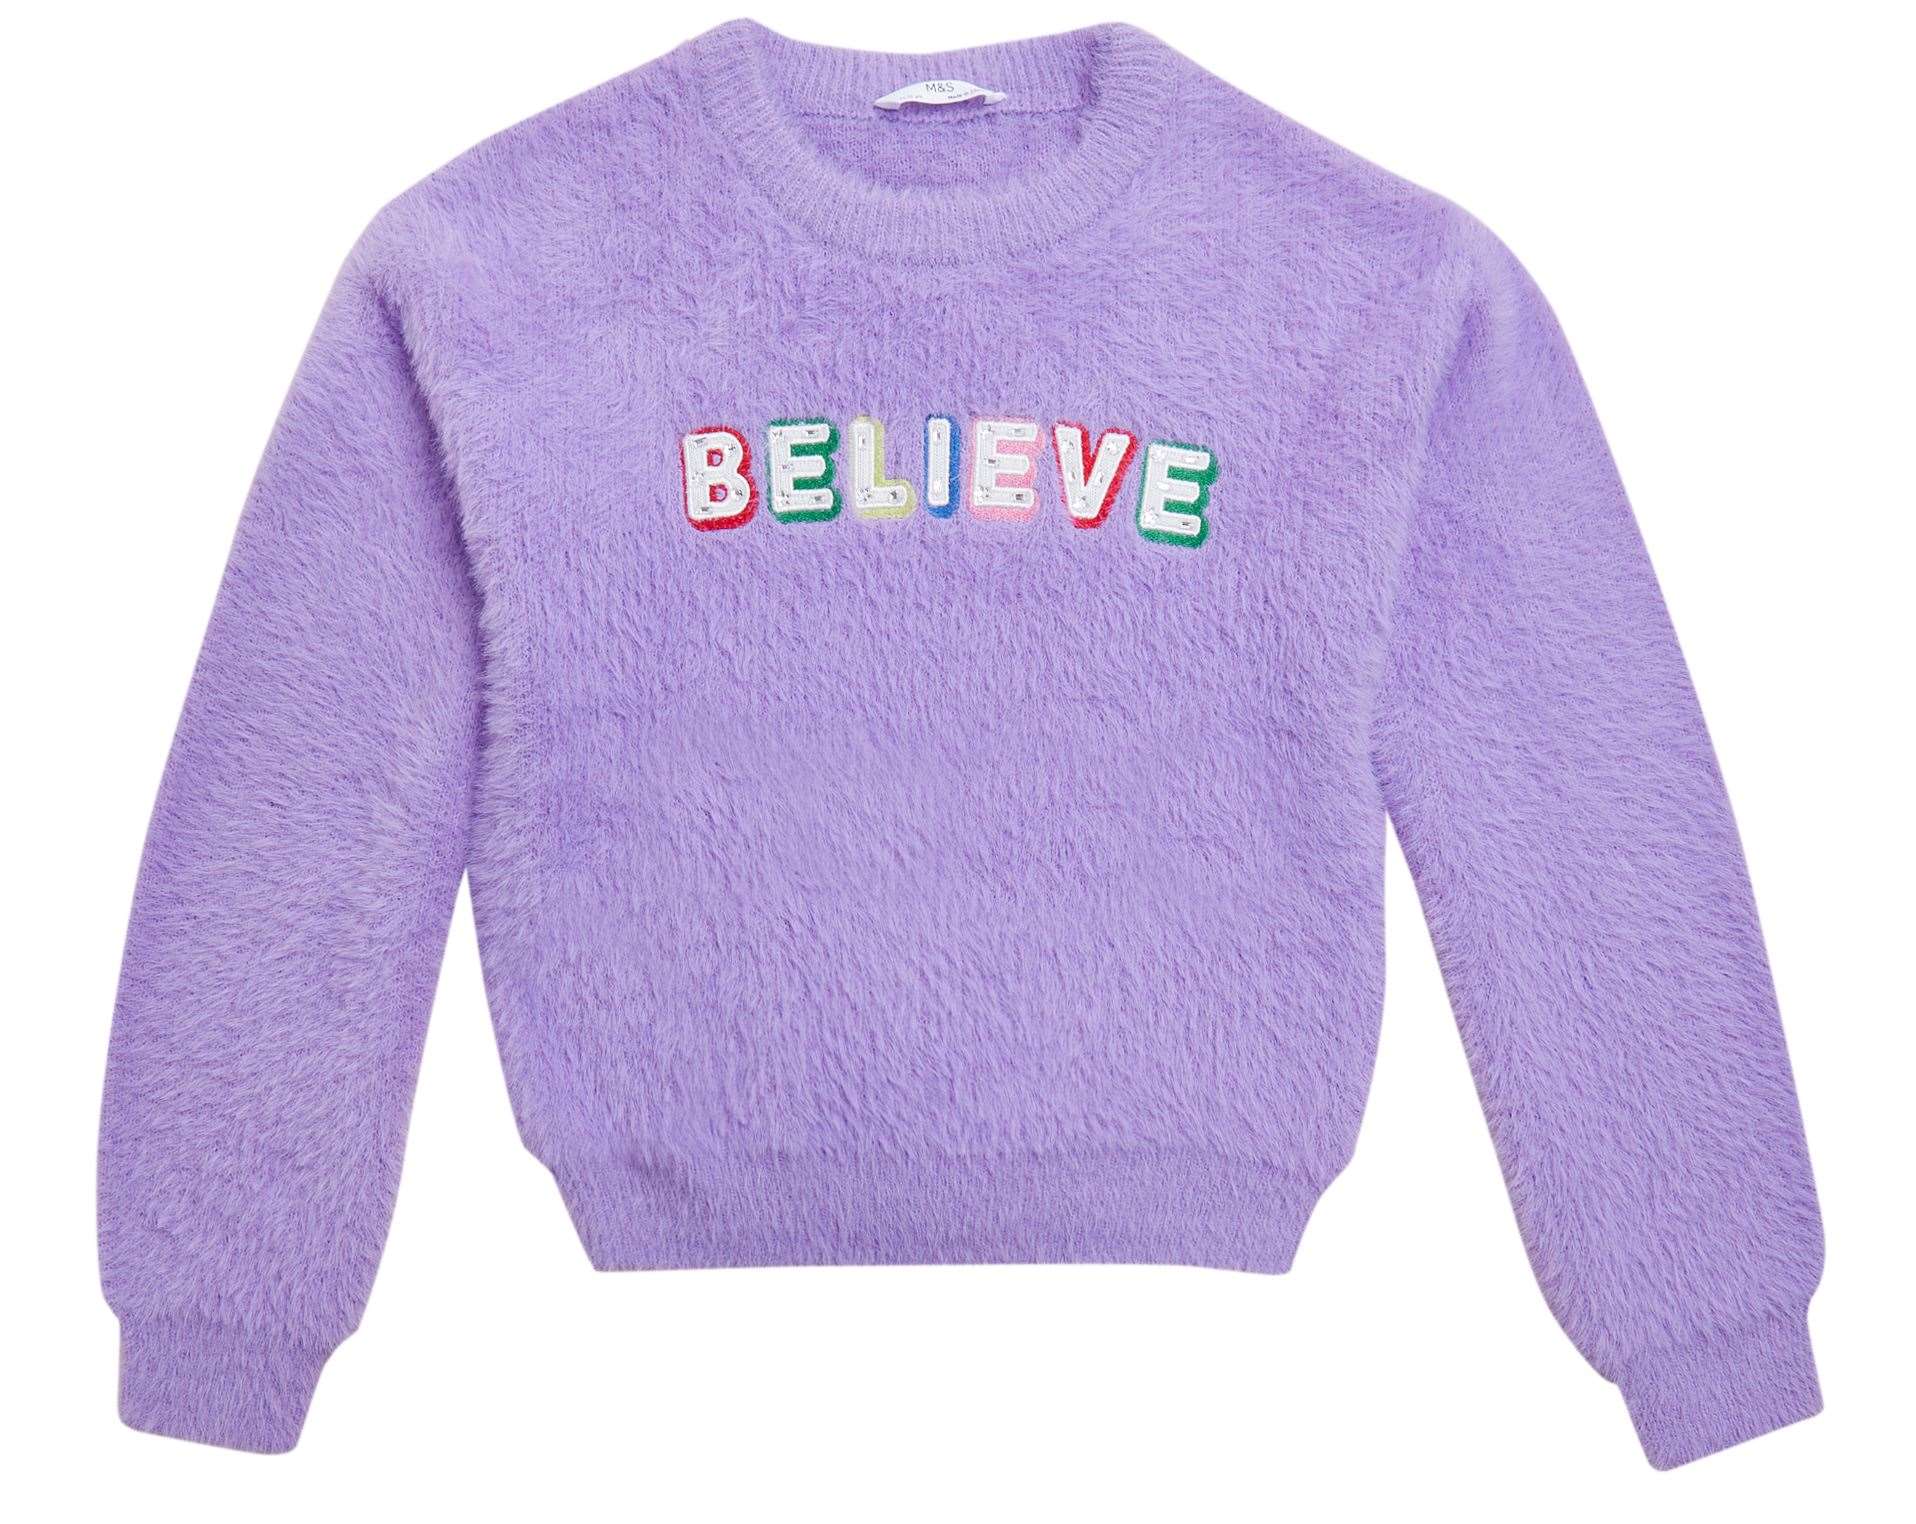 Kids matching Believe slogan jumper, £20, available from M&S